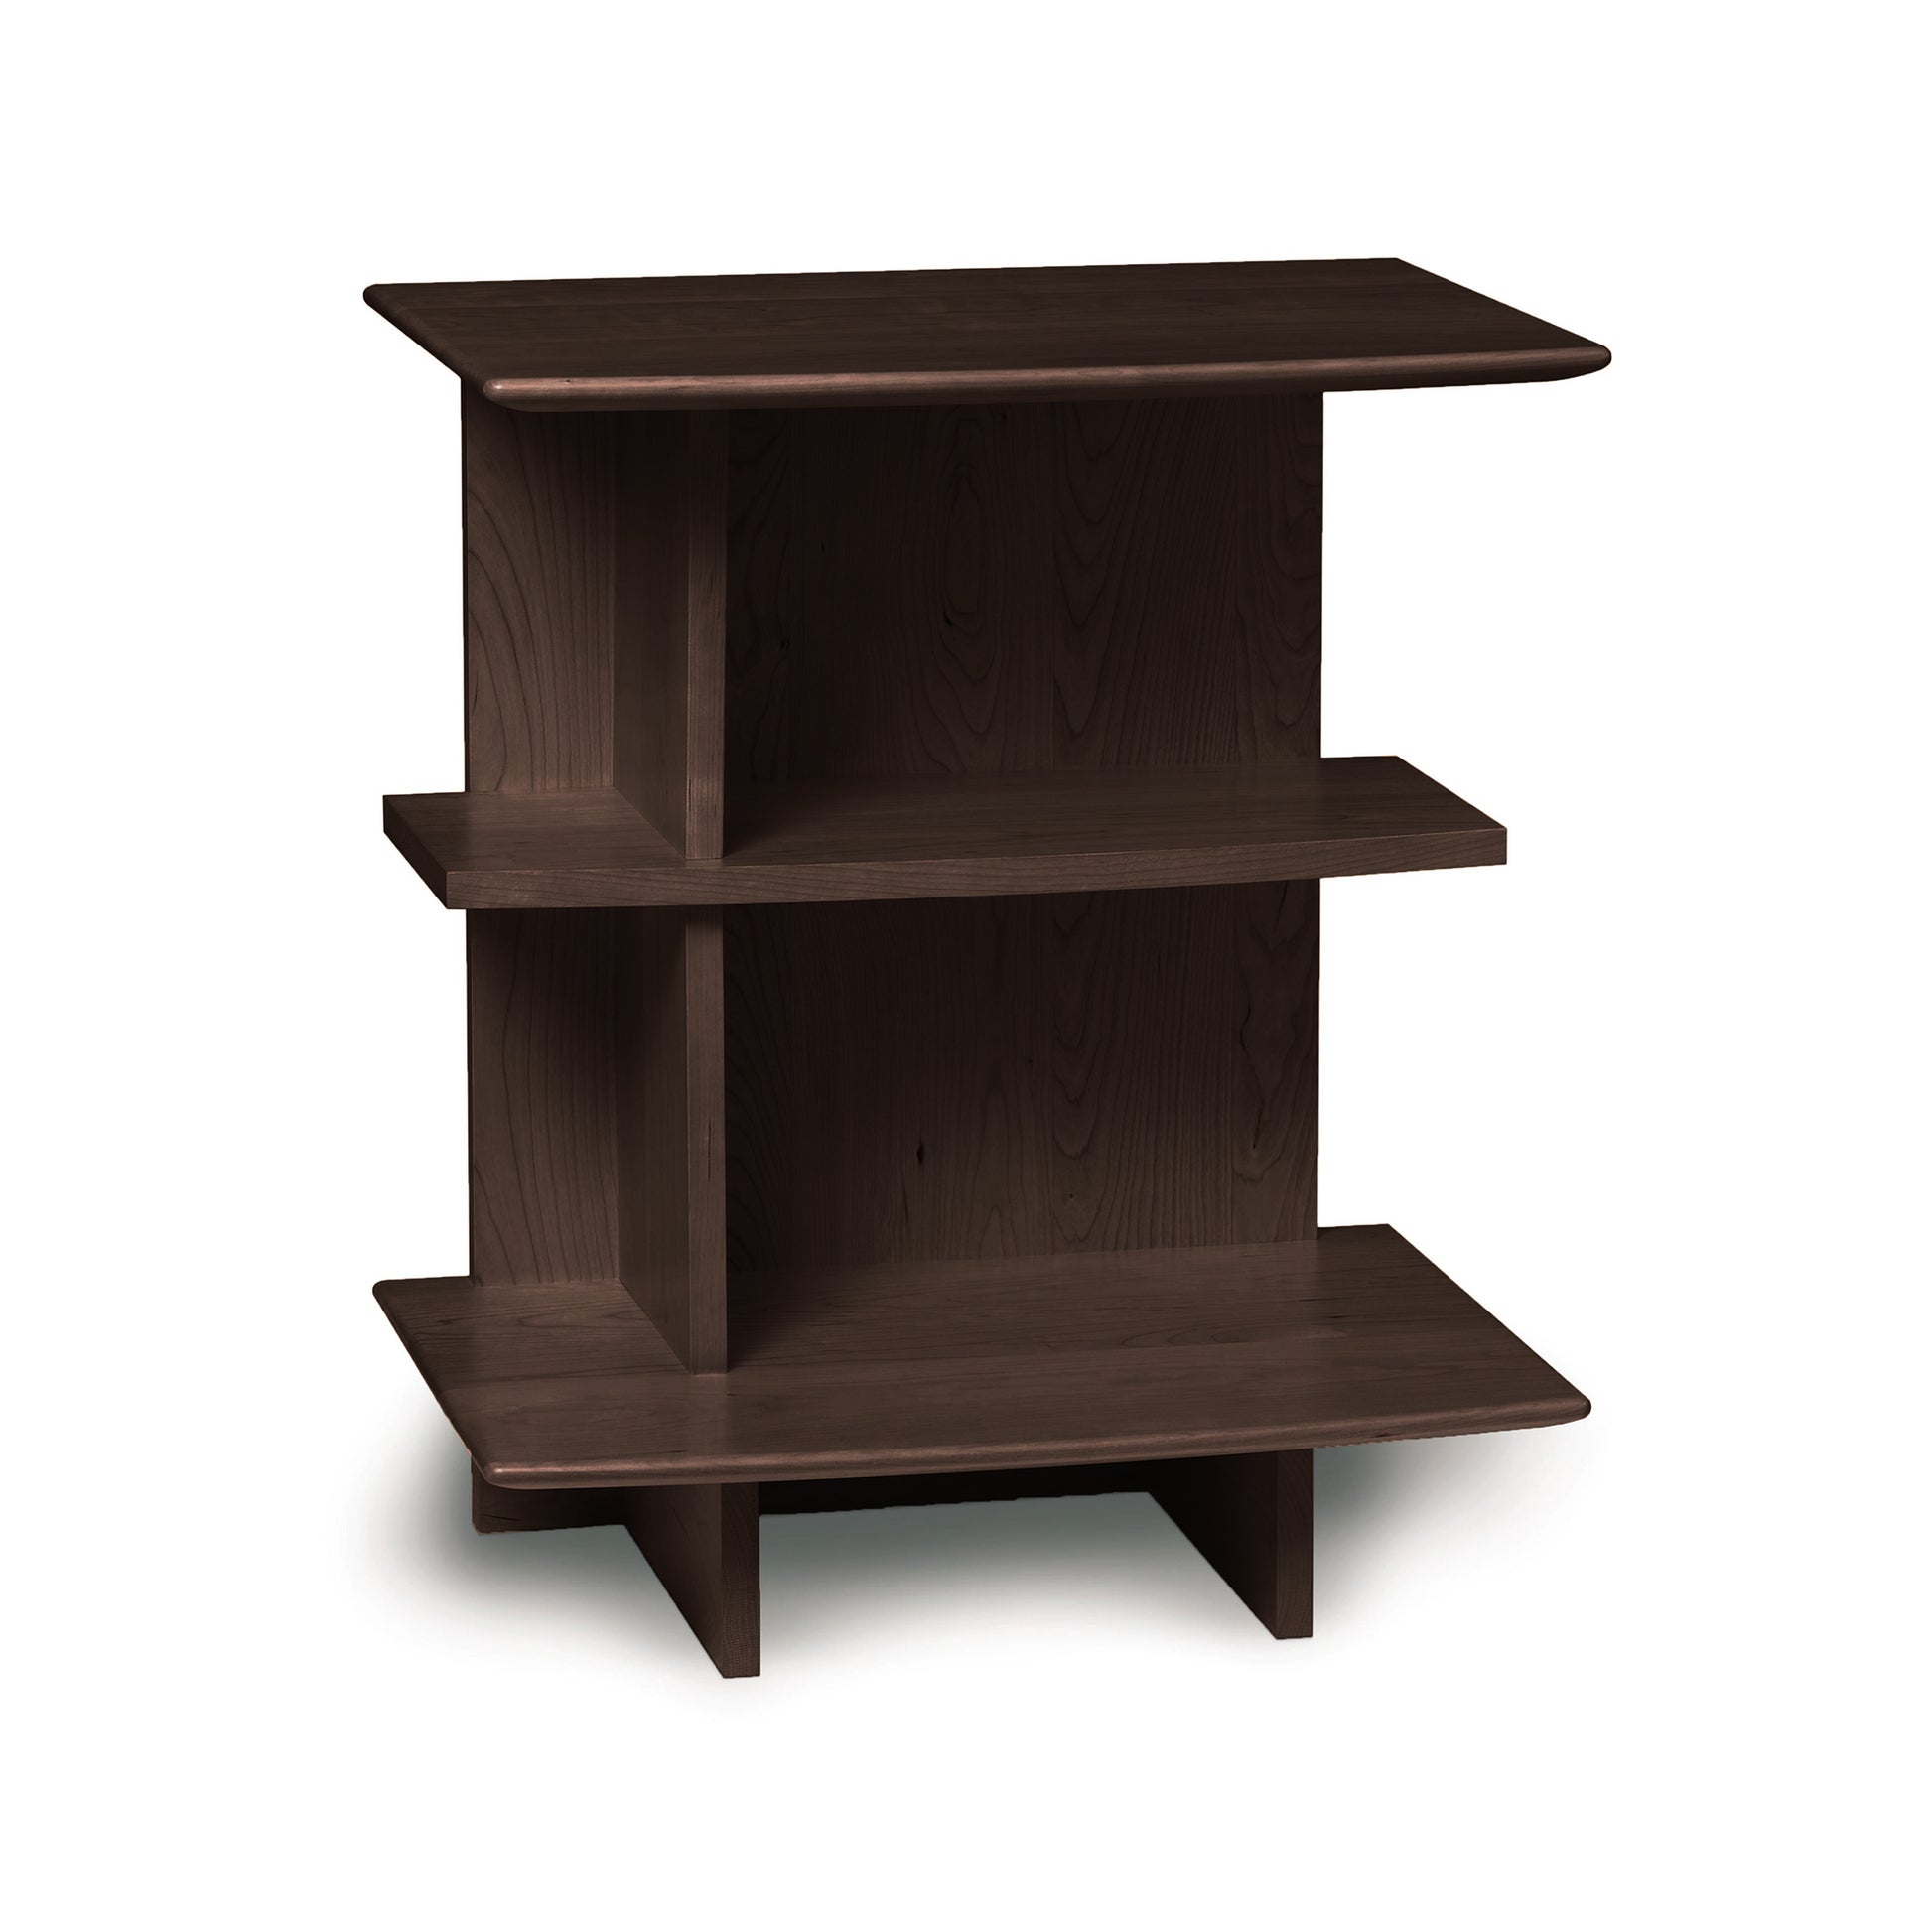 A dark brown Sarah Open Shelf Nightstand with two shelves, designed in Copeland Furniture's Sarah solid wood collection.